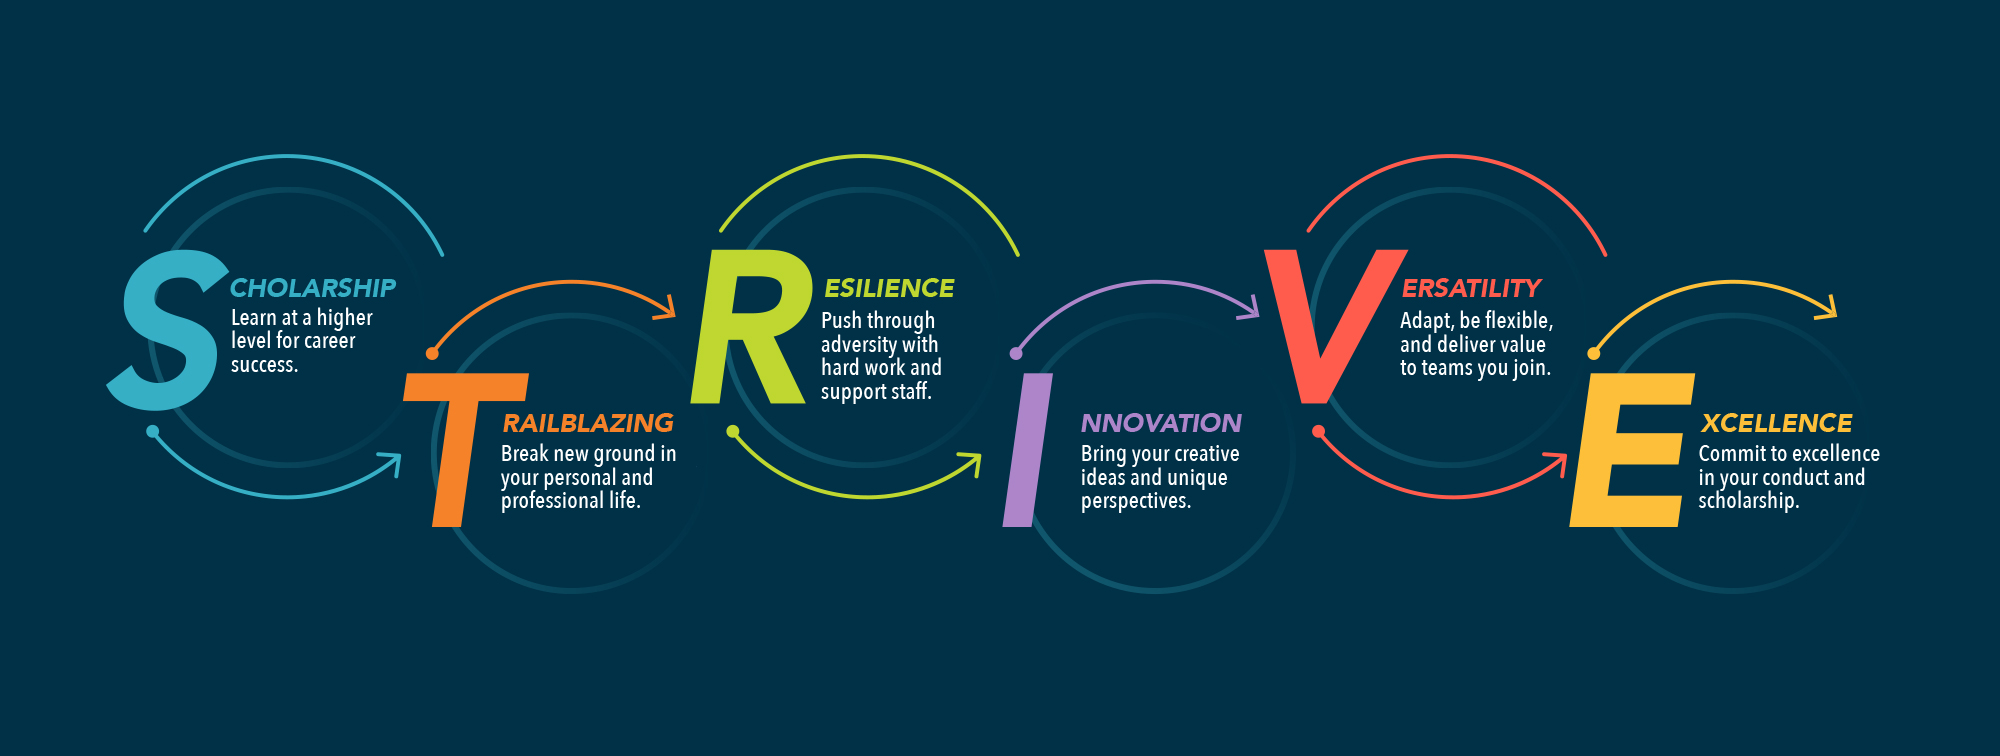 STRIVE graphic spelling out the words Scholarship, Trailblazing, Resilience, Innovation, Versatility, and Excellence